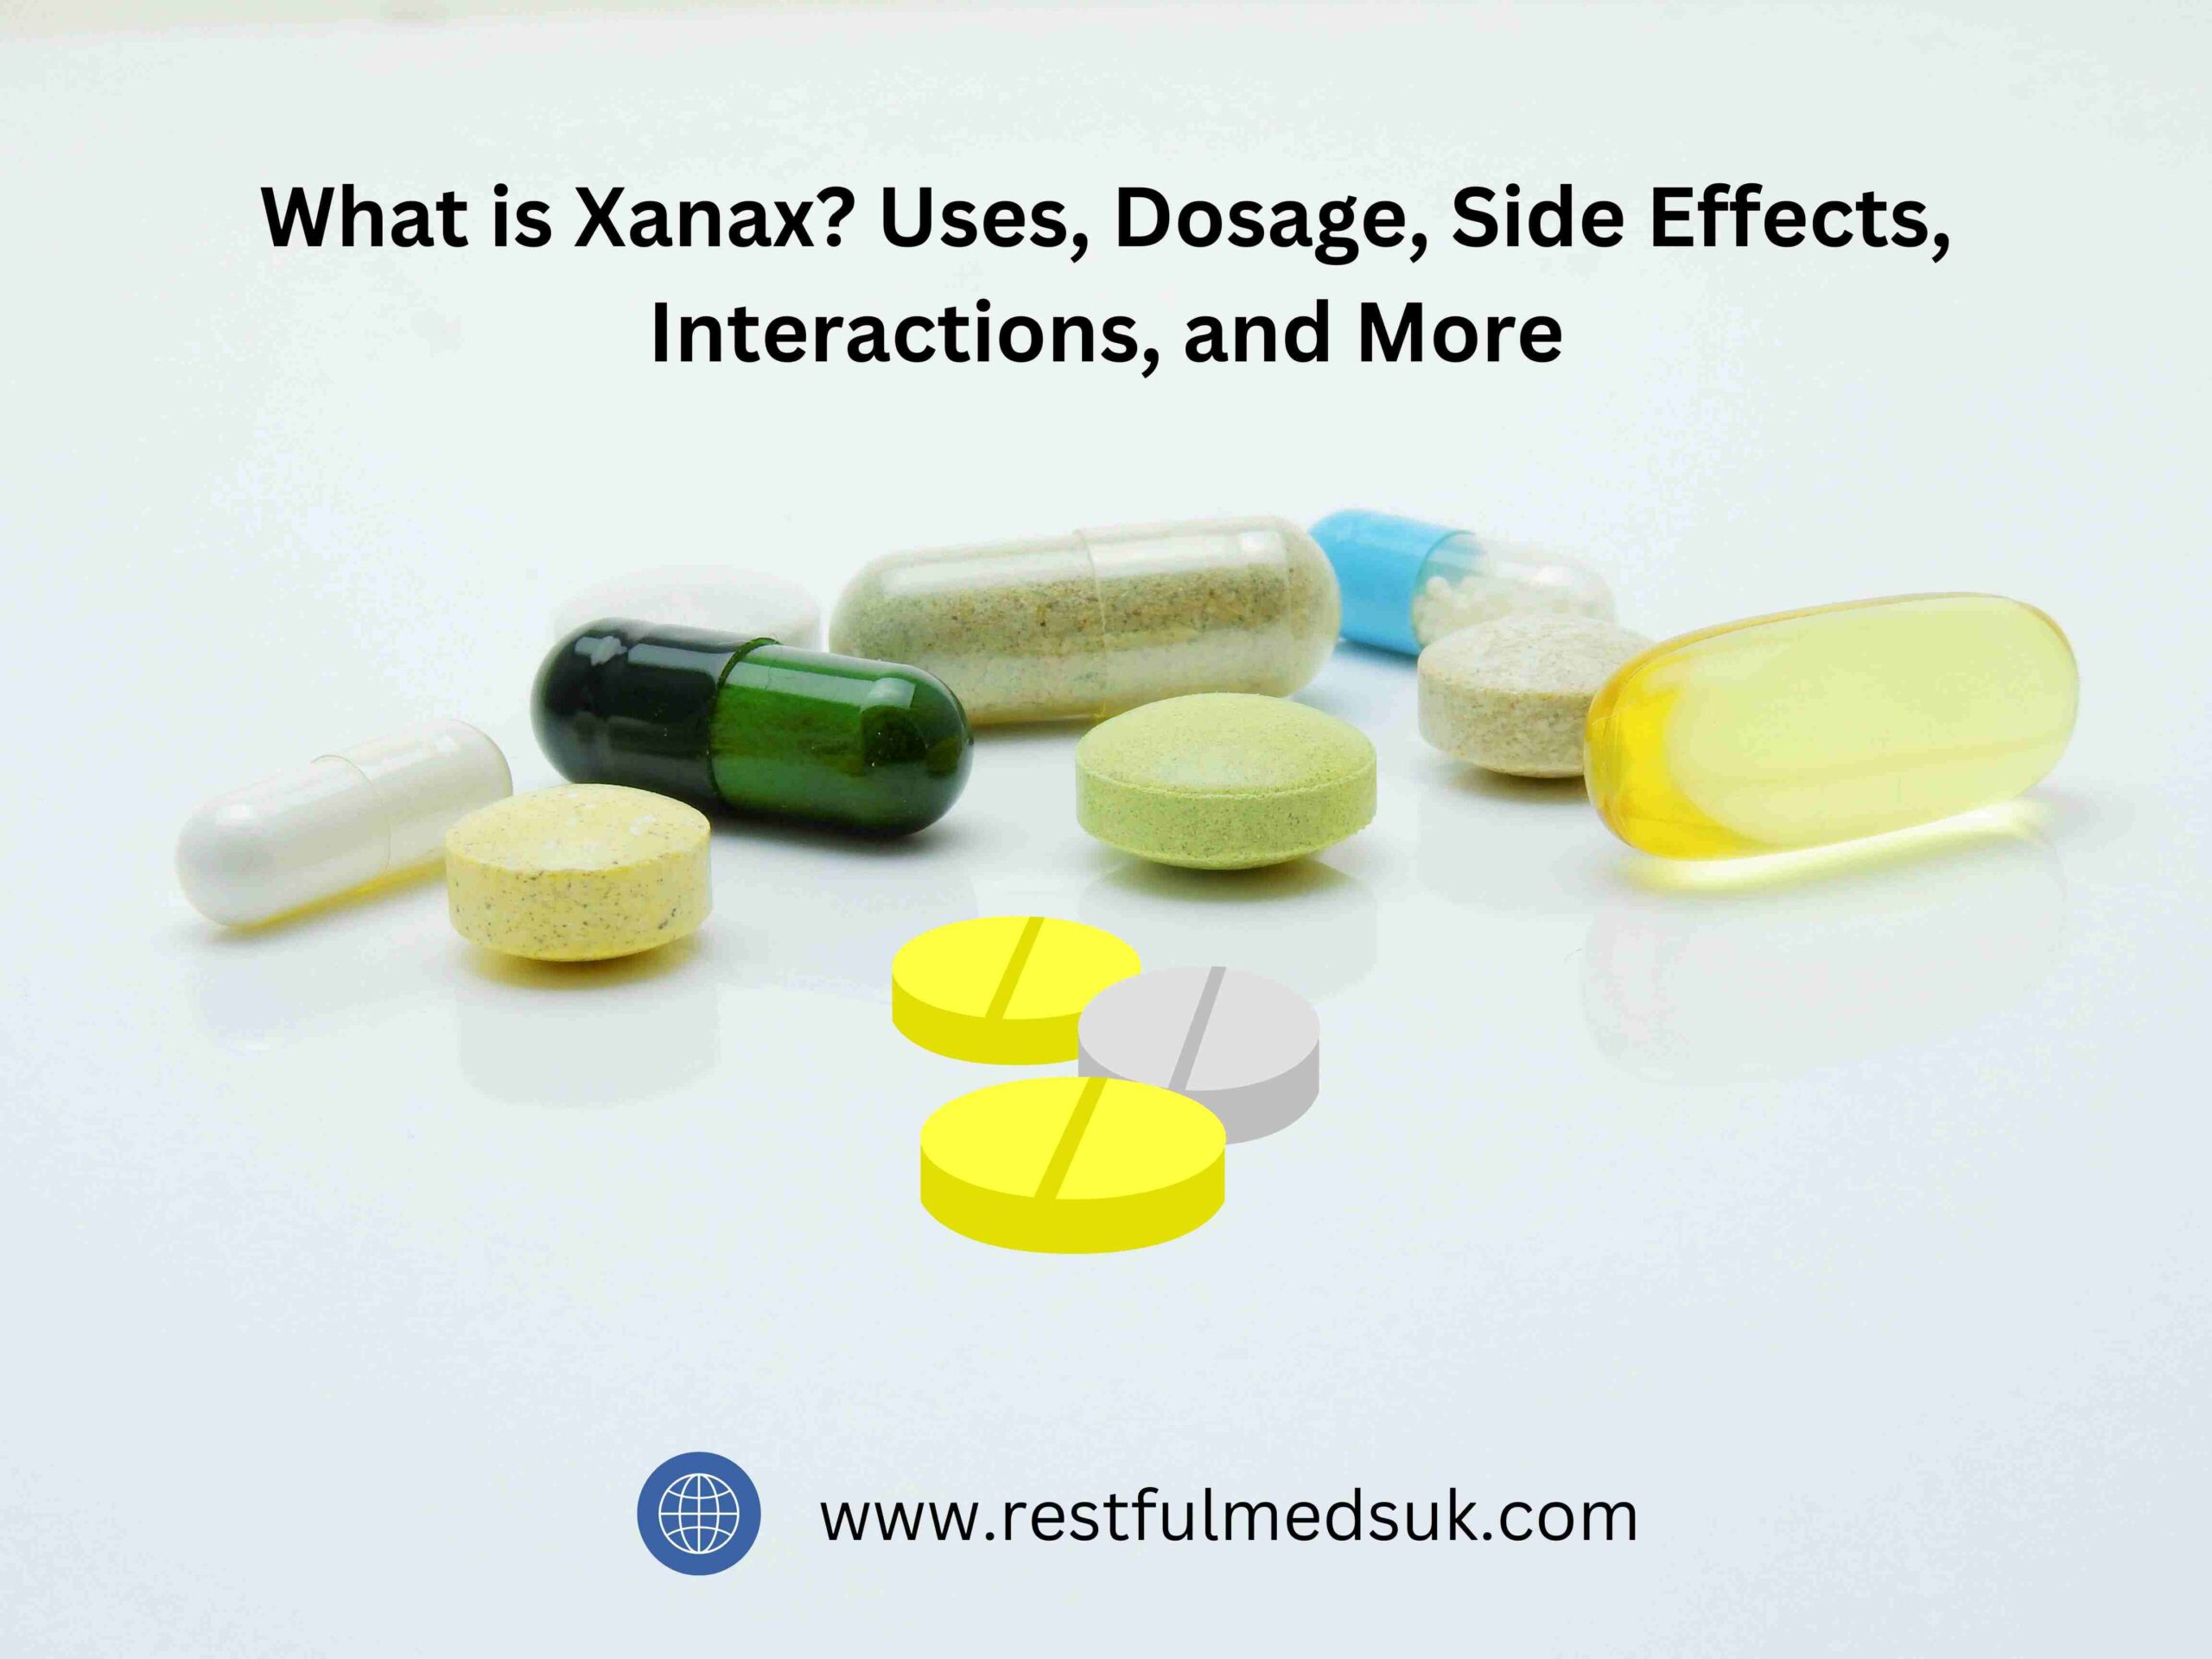 What is Xanax? Uses, Dosage, Side Effects, Interactions, and More